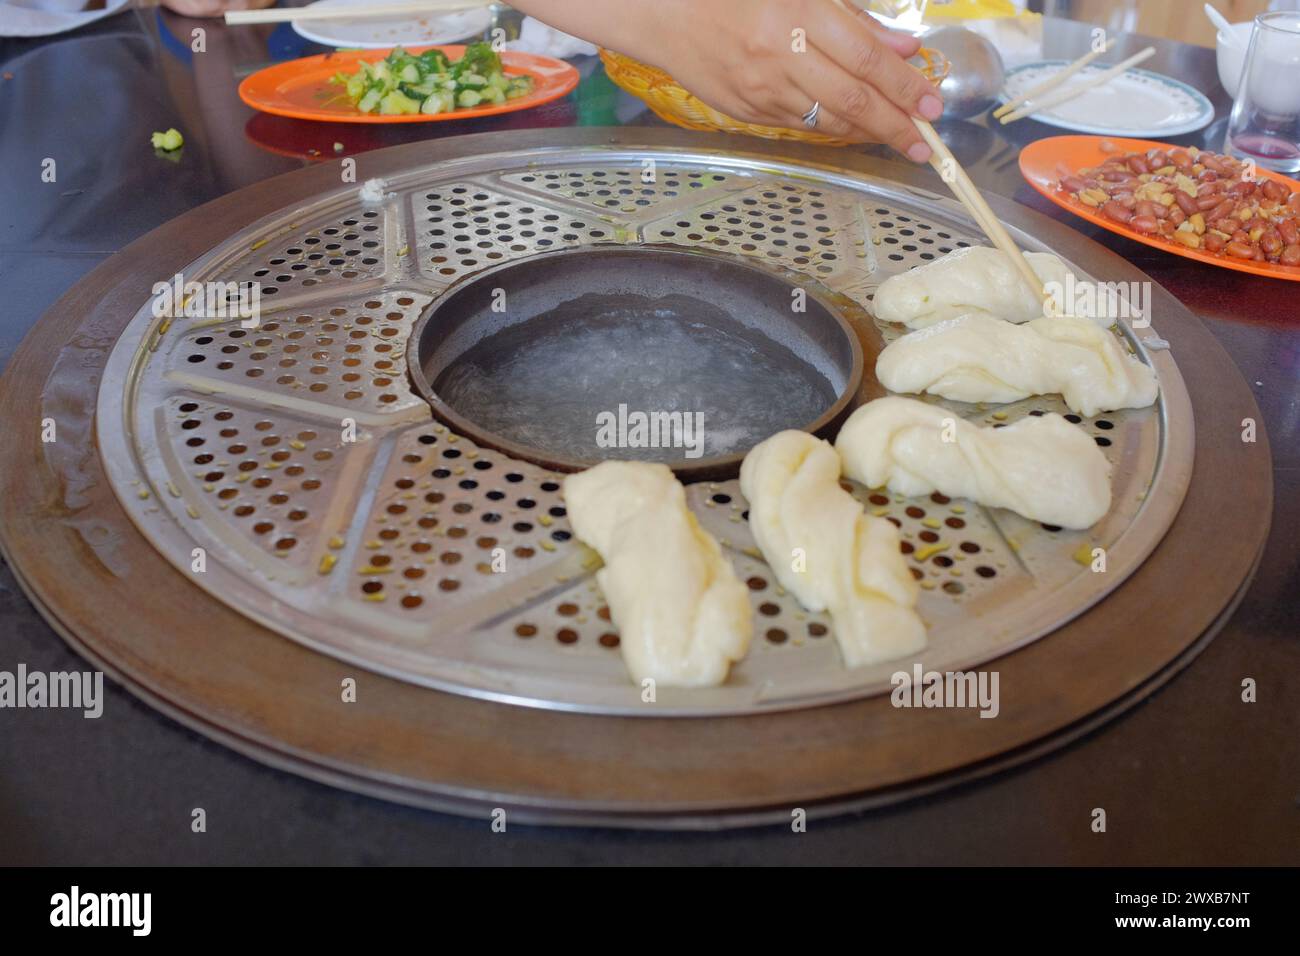 It's a traditional Chinese stove hot pot that is commonly used in the Northeast. The steam from the hot pot is used to cook the bun above. Stock Photo